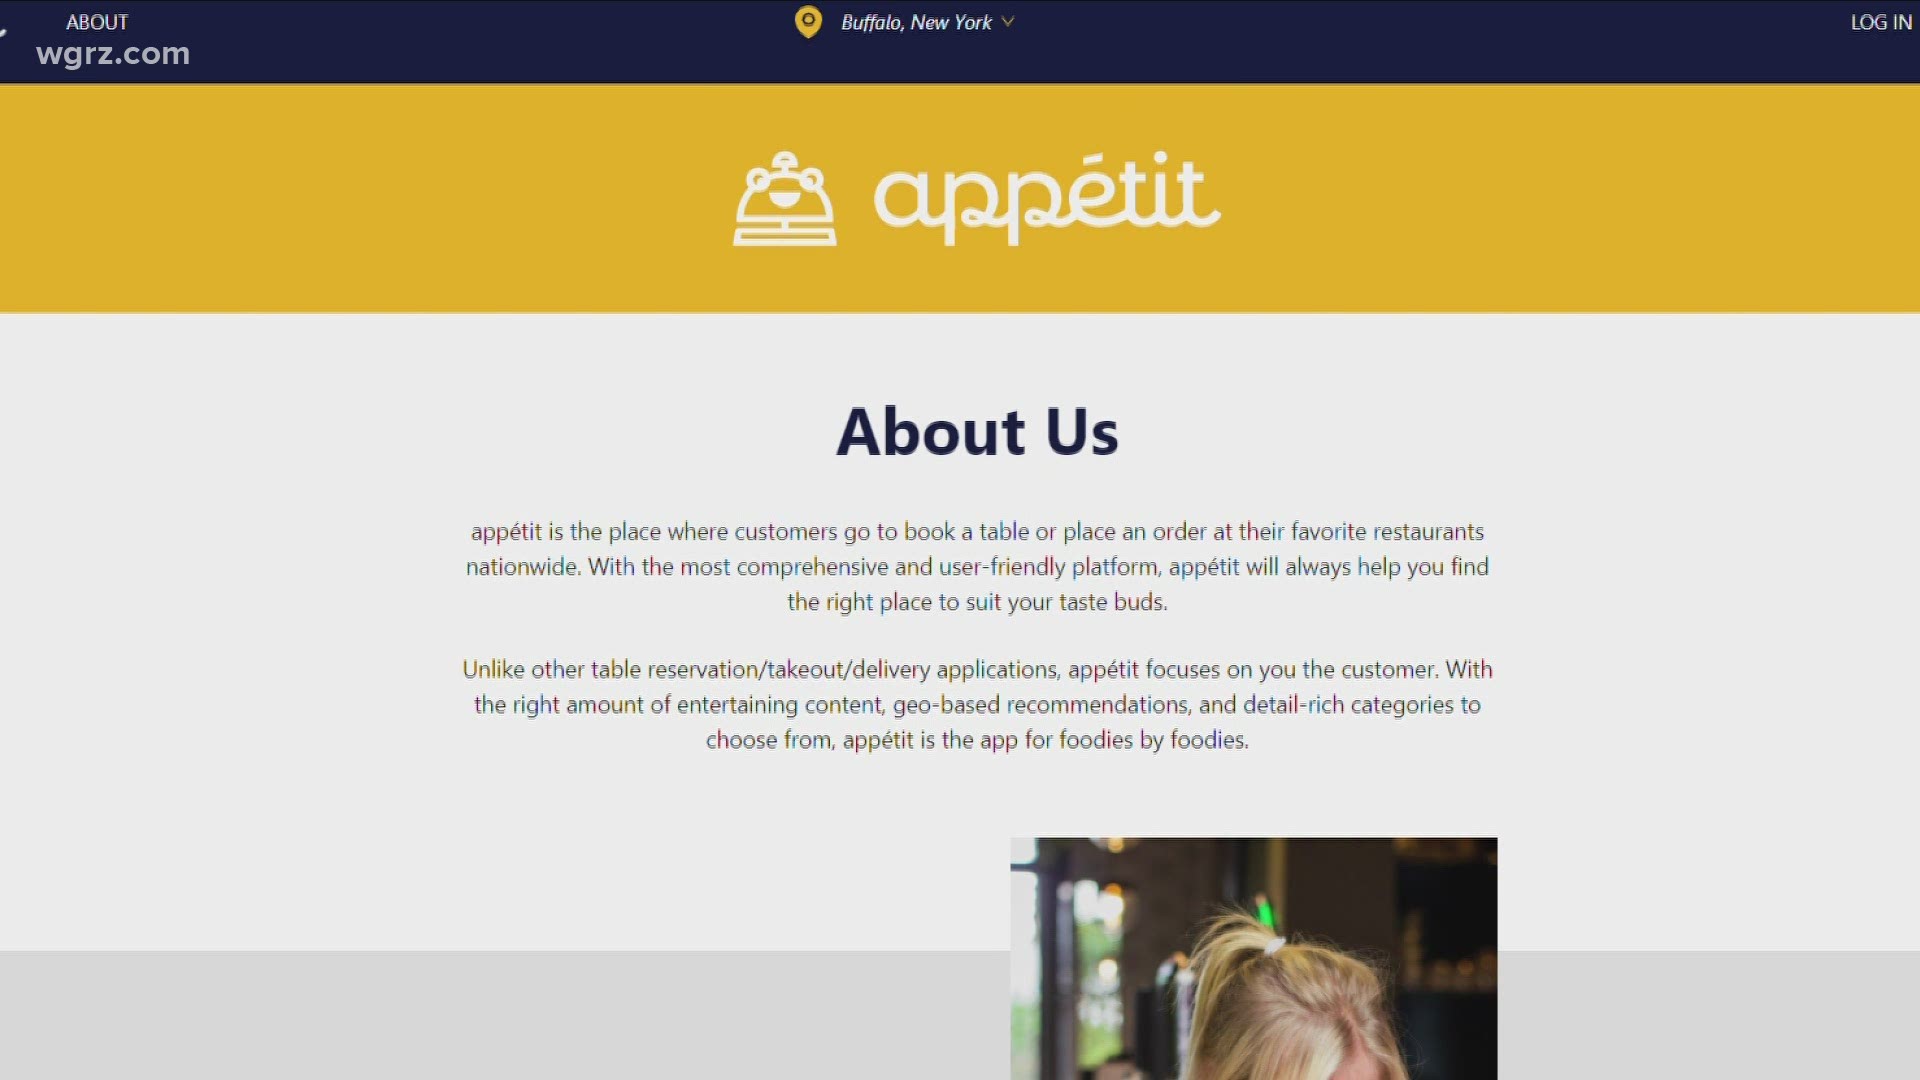 "appétit" was launched in WNY two weeks ago by two Buffalo-natives who say they're approach to service is different than the national chains.